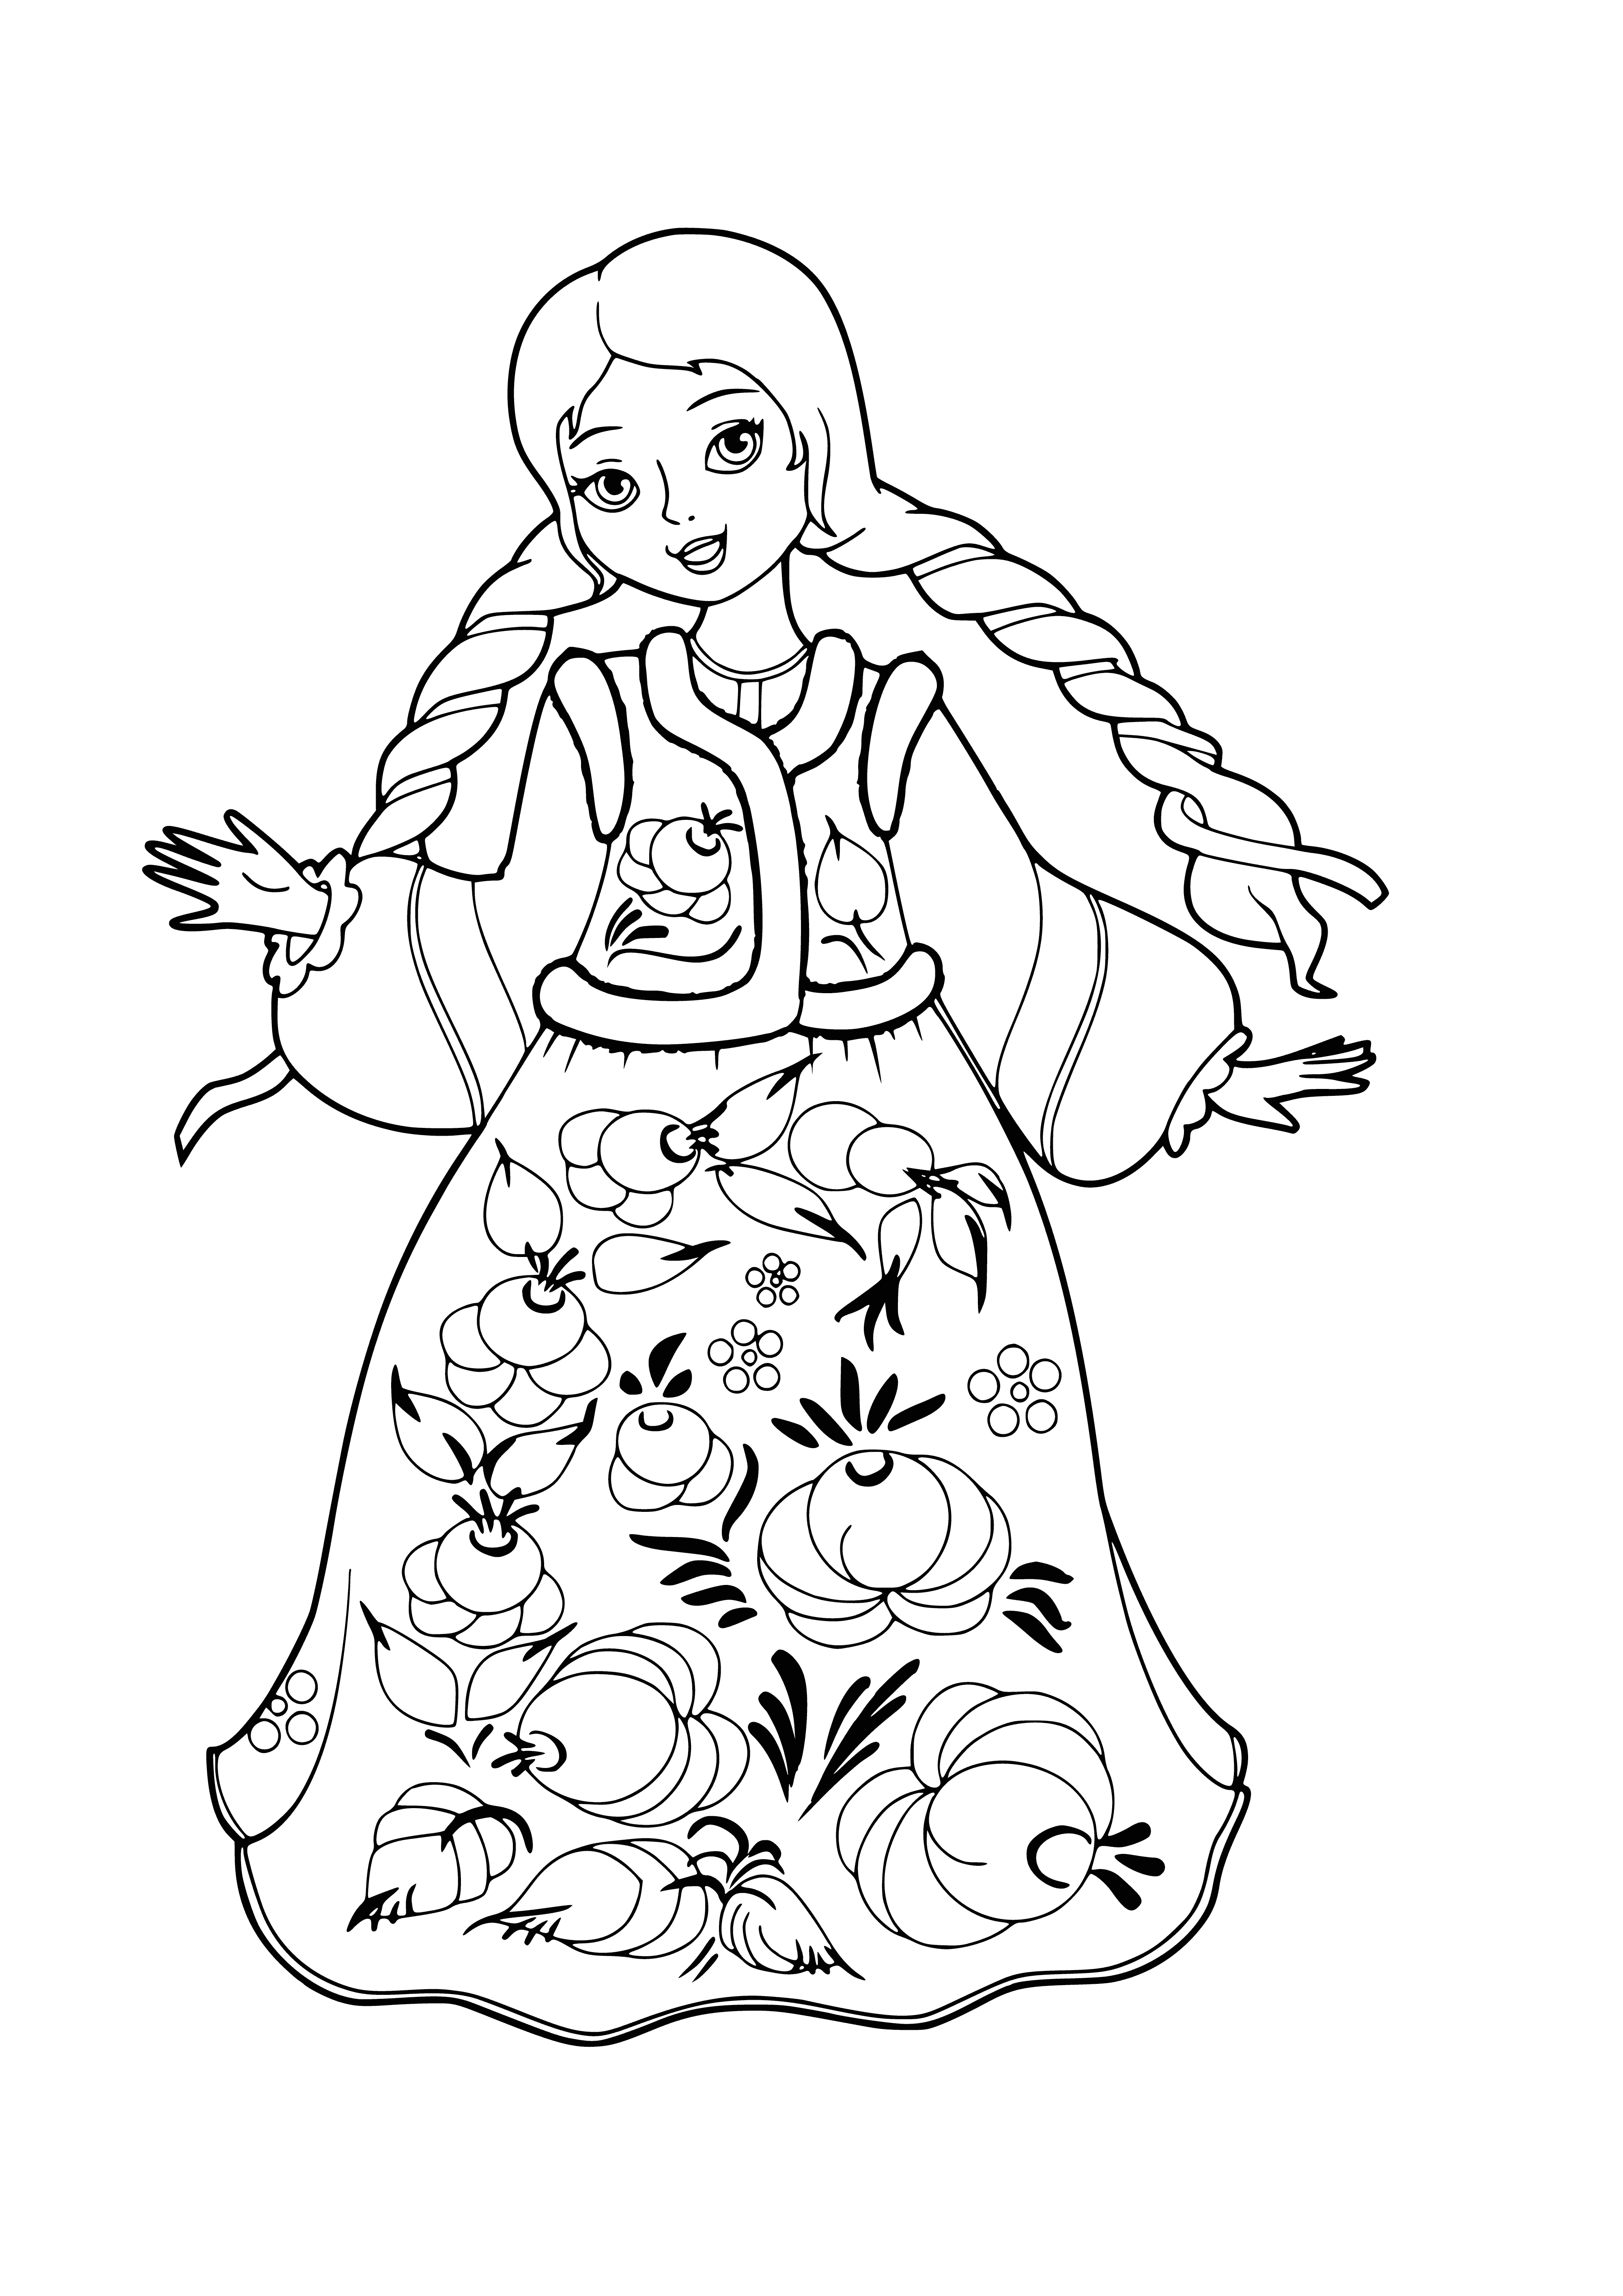 coloring page: Colorful and beautiful women in outfits having fun - that's the theme of this coloring page. #coloringpage #art